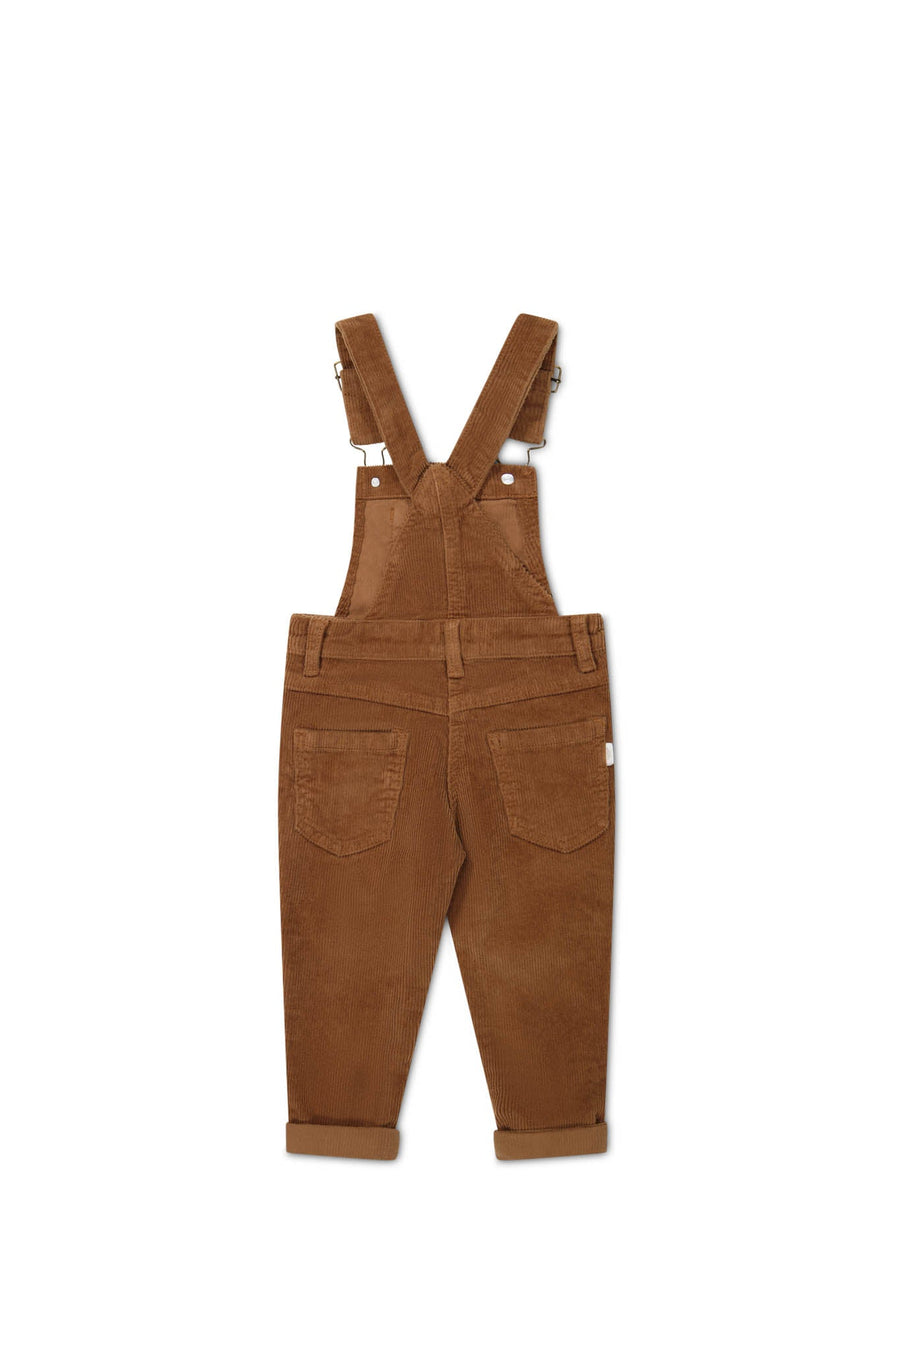 Jordie Cord Overall - Spiced Childrens Overall from Jamie Kay USA